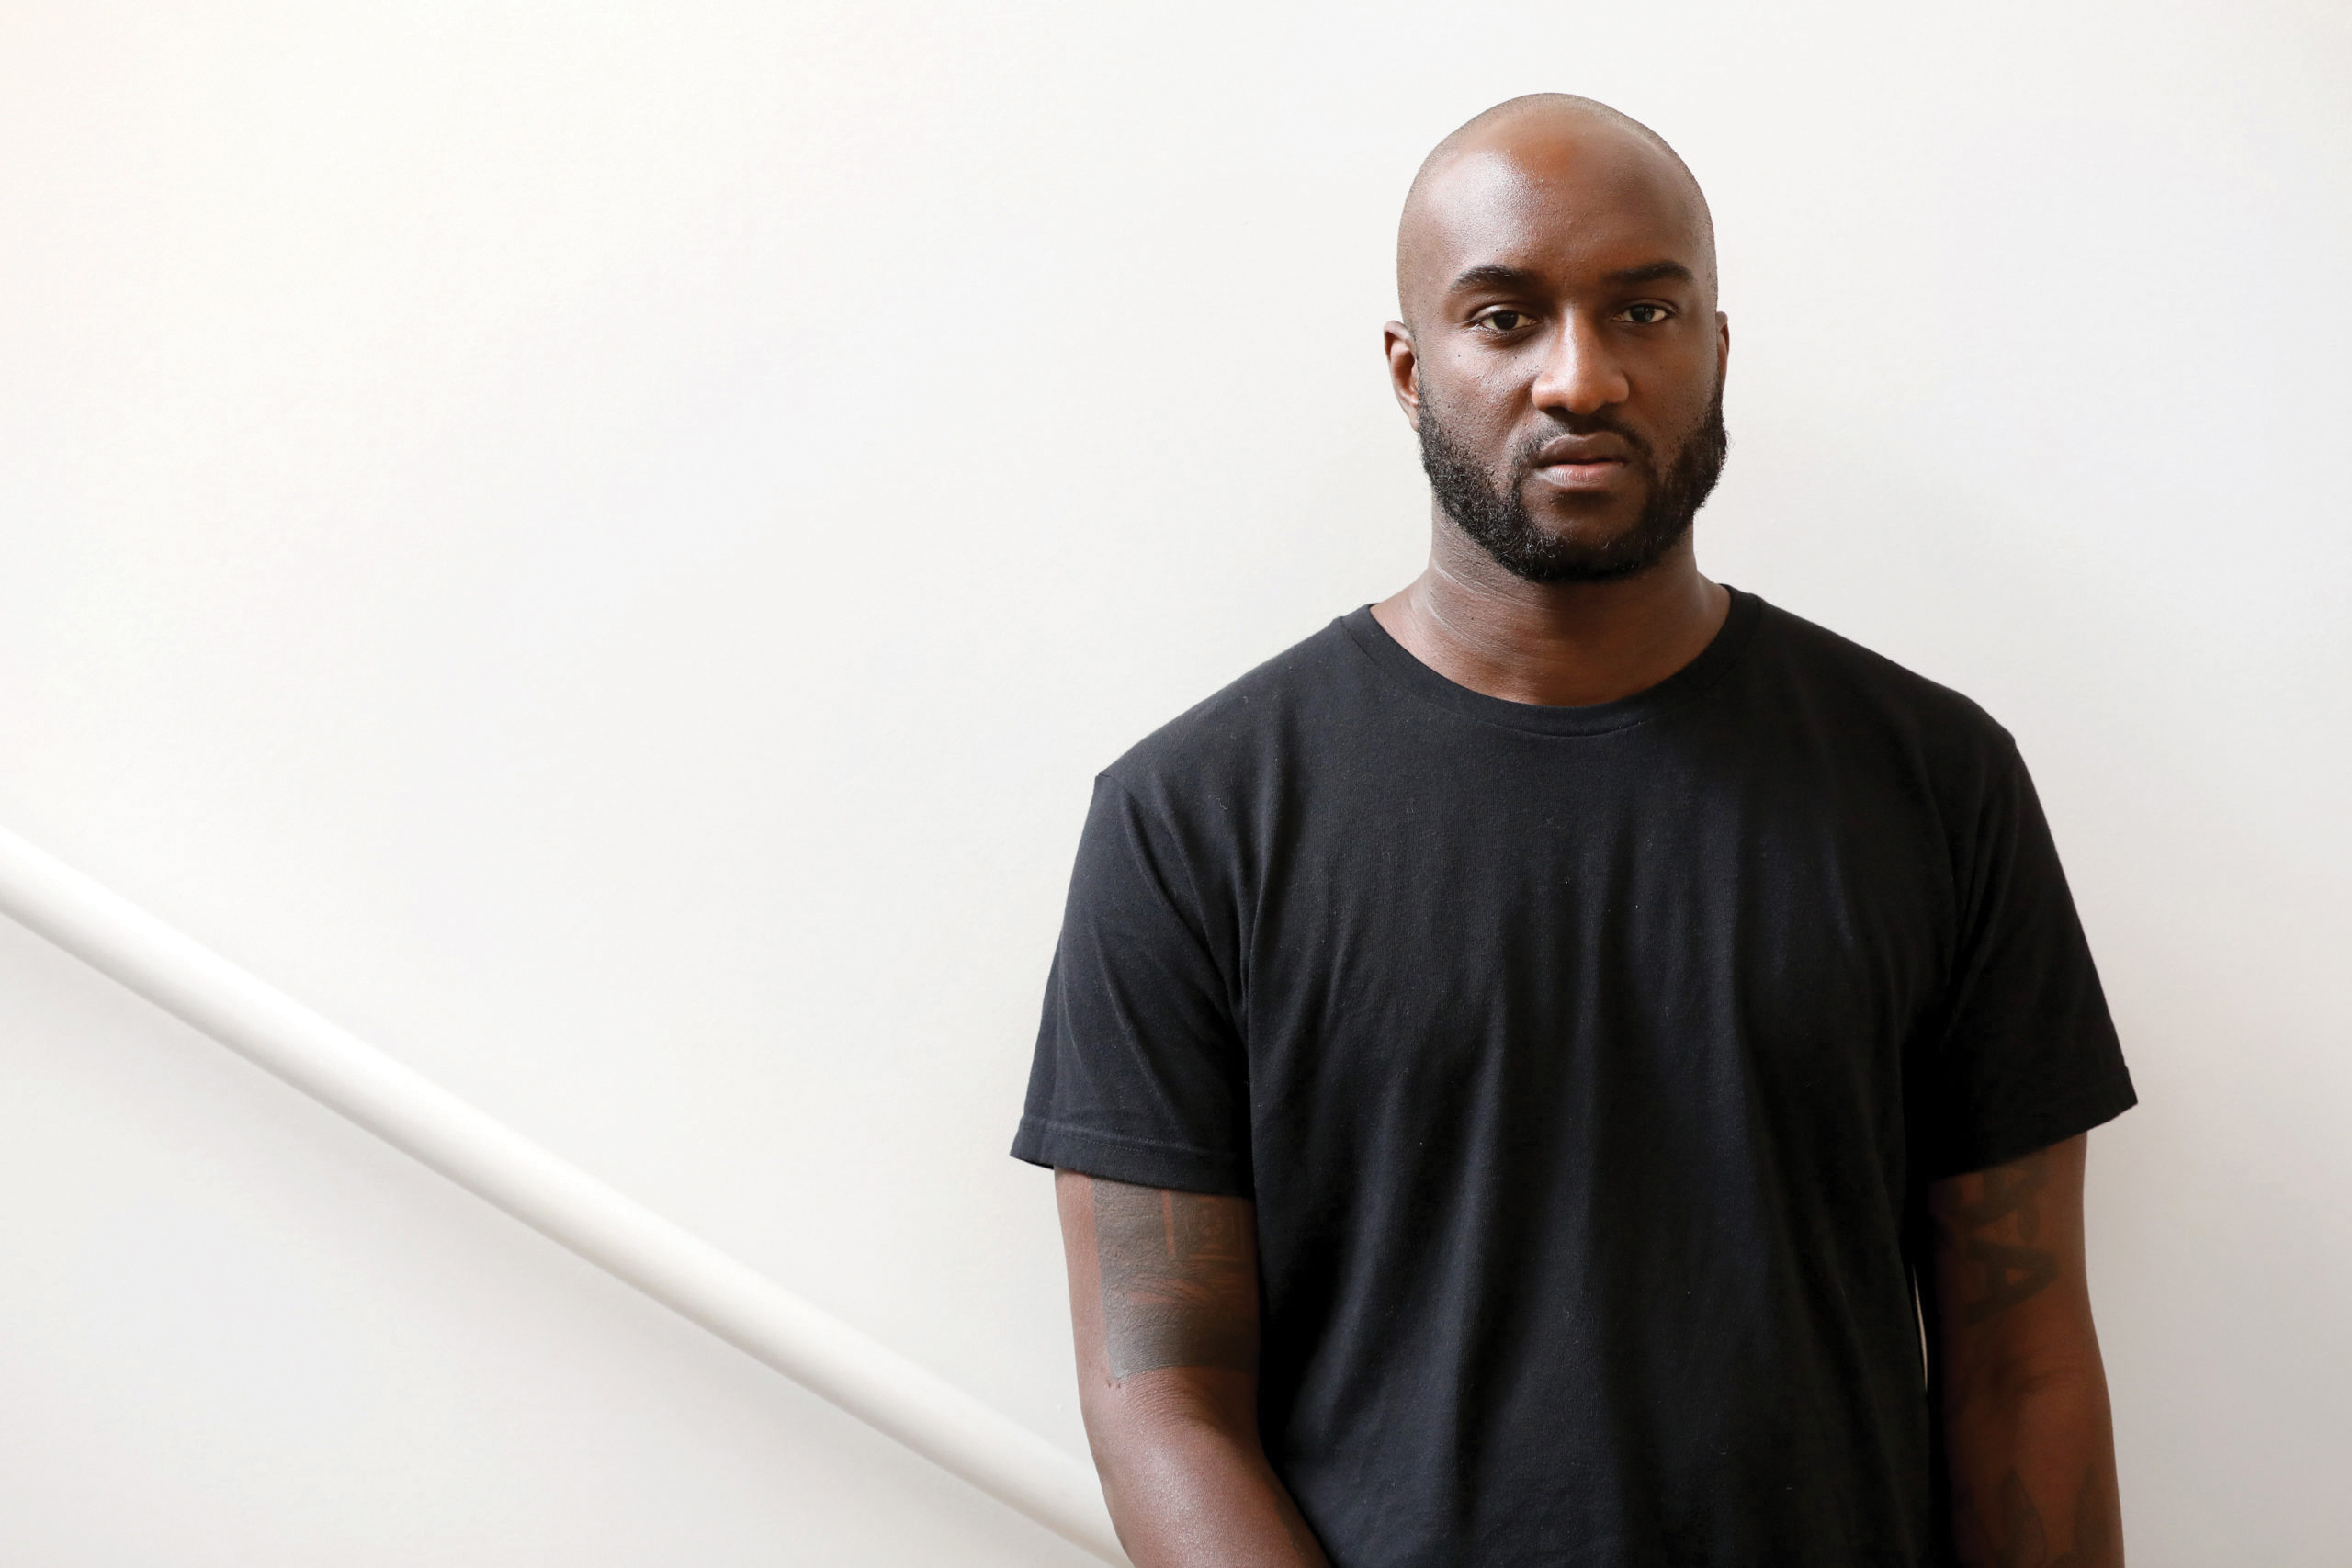 Style designer Virgil Abloh dies of most cancers at 41 | Richmond Absolutely free Press